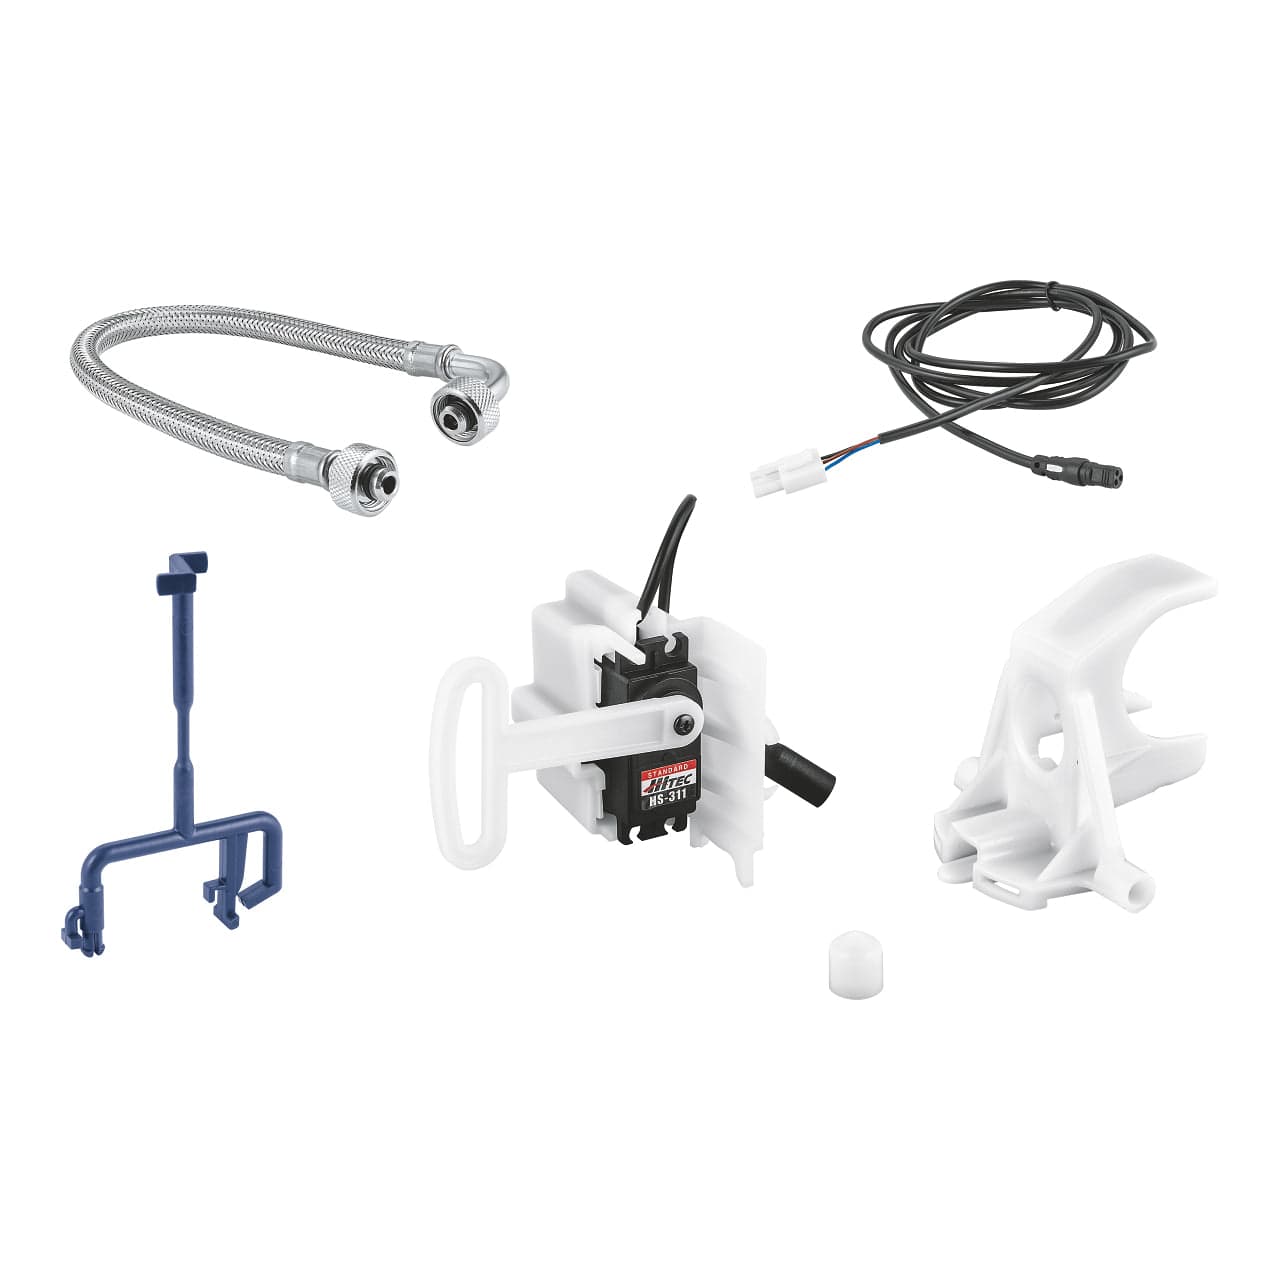 Grohe Sensia Arena Installation Kit For Automatic Flush & Pre-Flush - 46944001 | Supply Master | Accra, Ghana Bathroom Accessories Buy Tools hardware Building materials